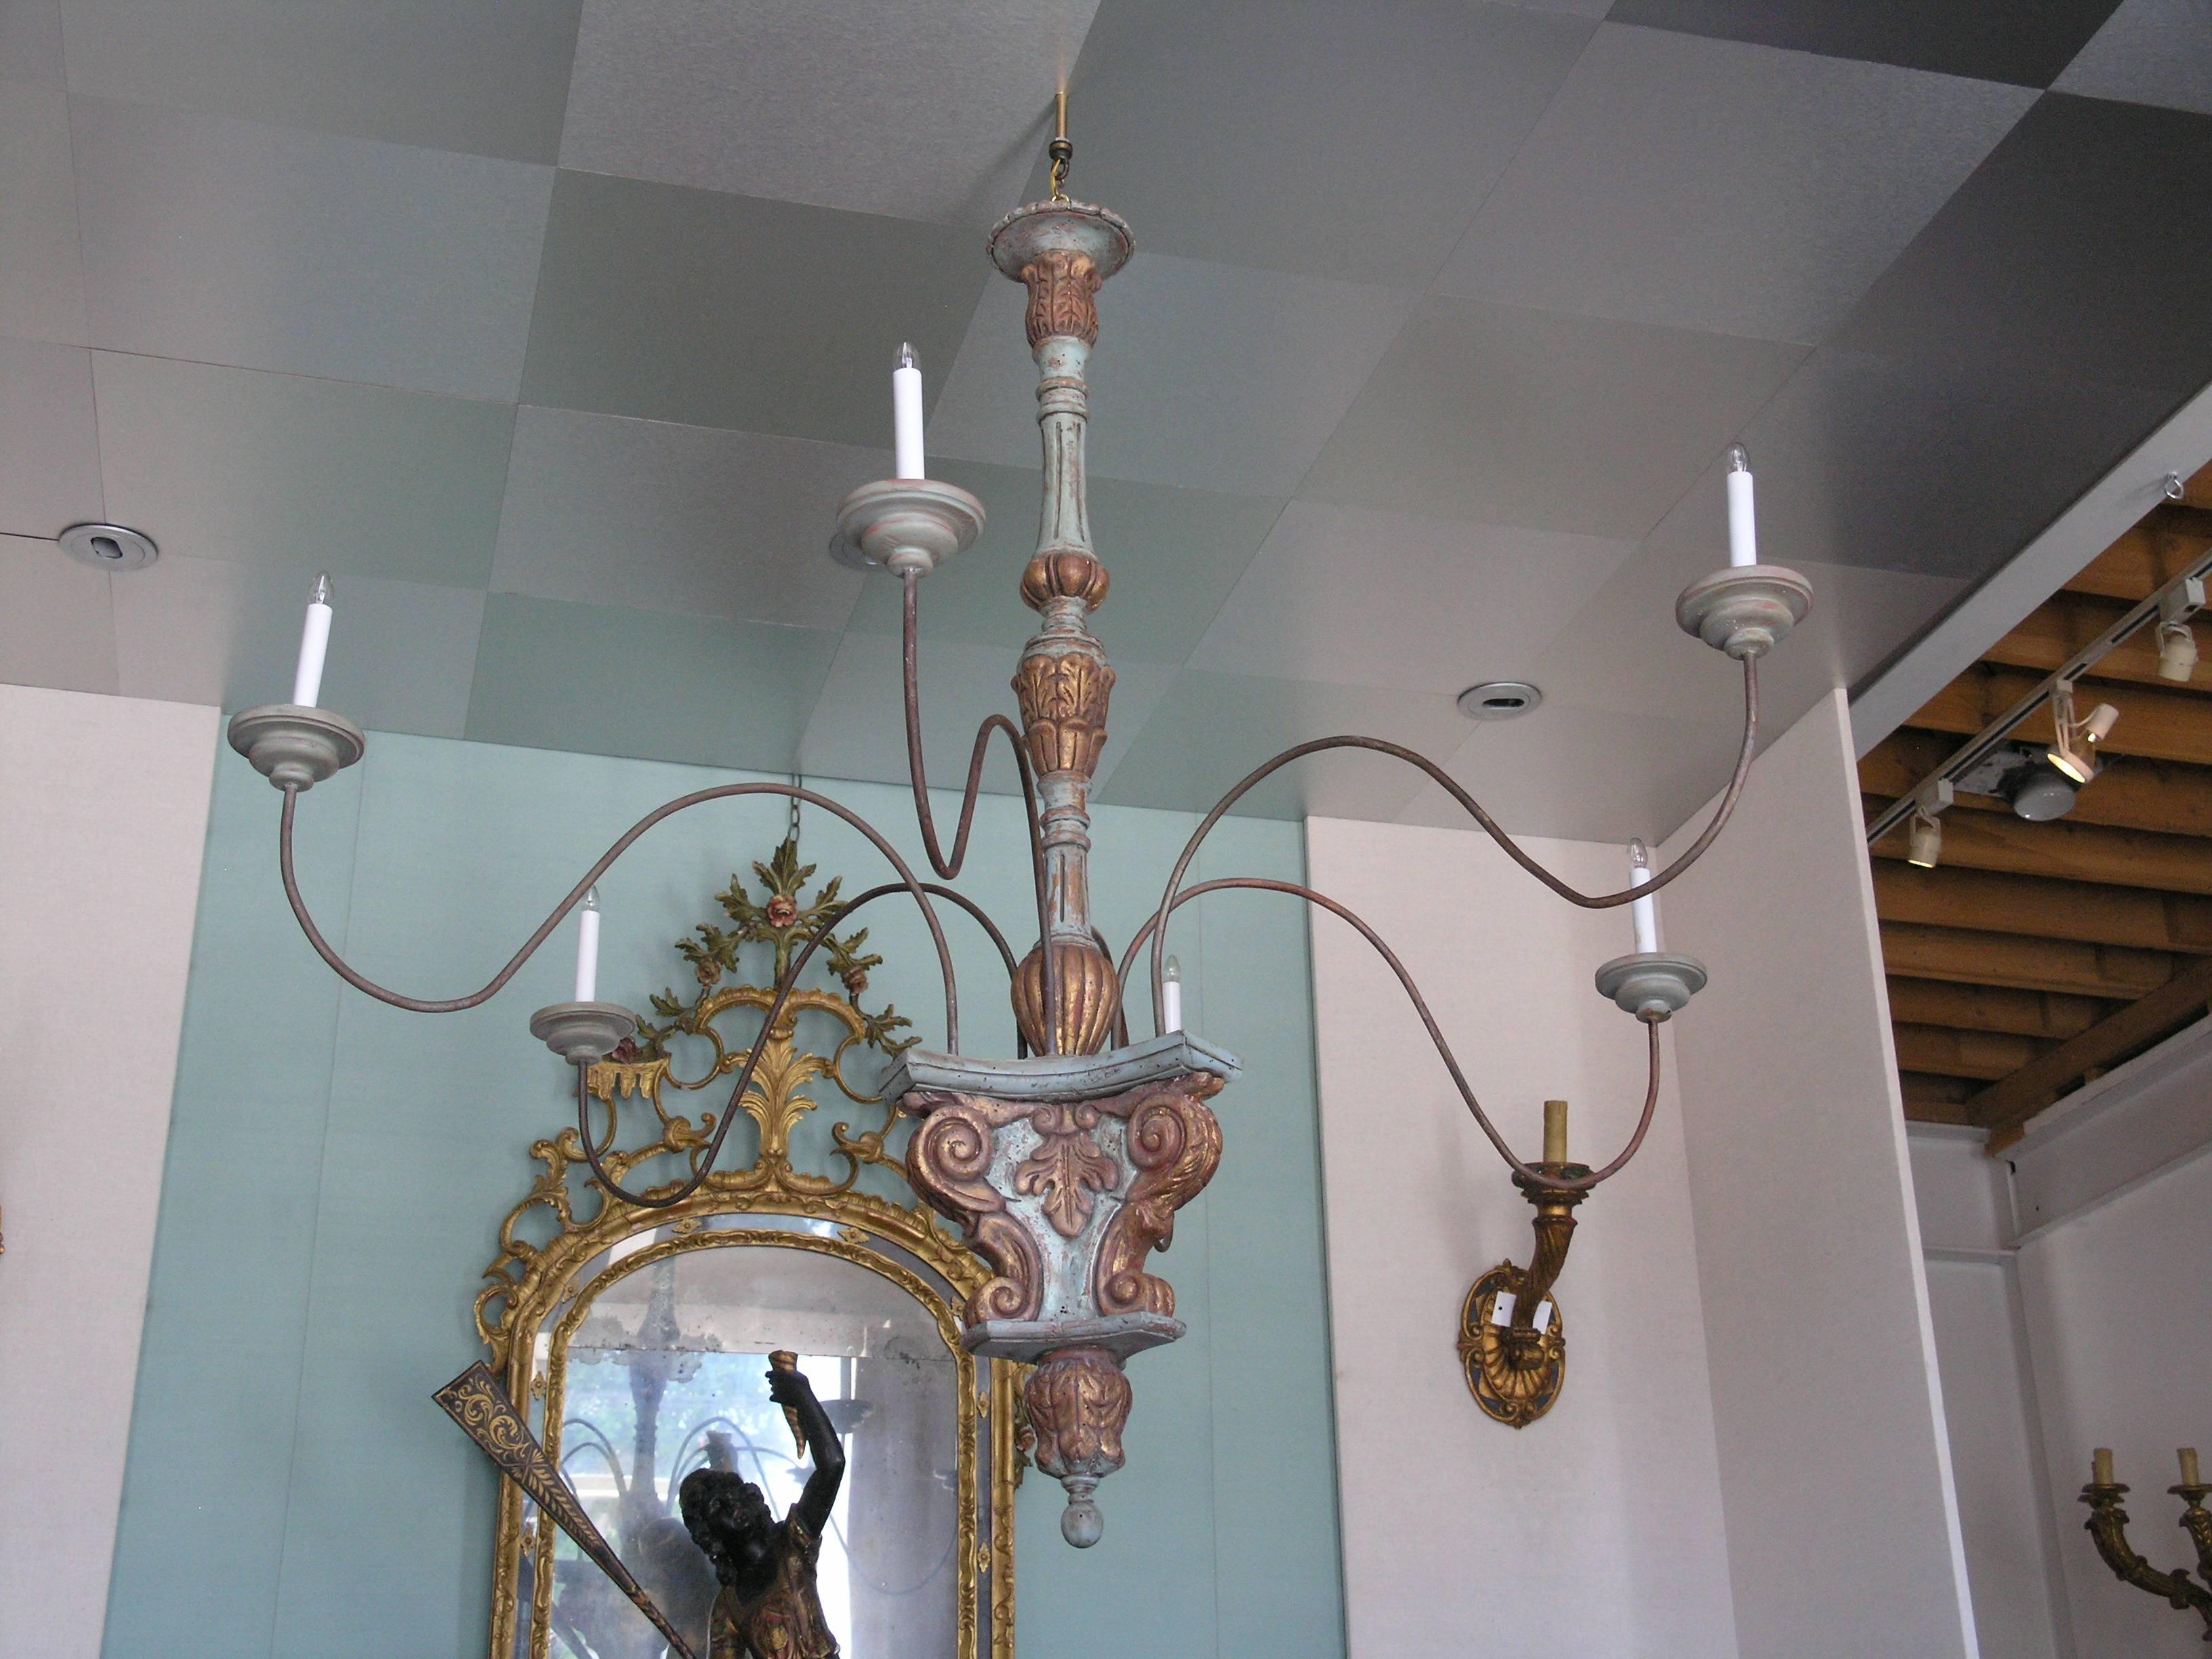 Painted Tuscan chandeliers composed of 19th century and later elements.
each with leaf carved baluster standards issuing six tole scrolling arms on tripartite bases 